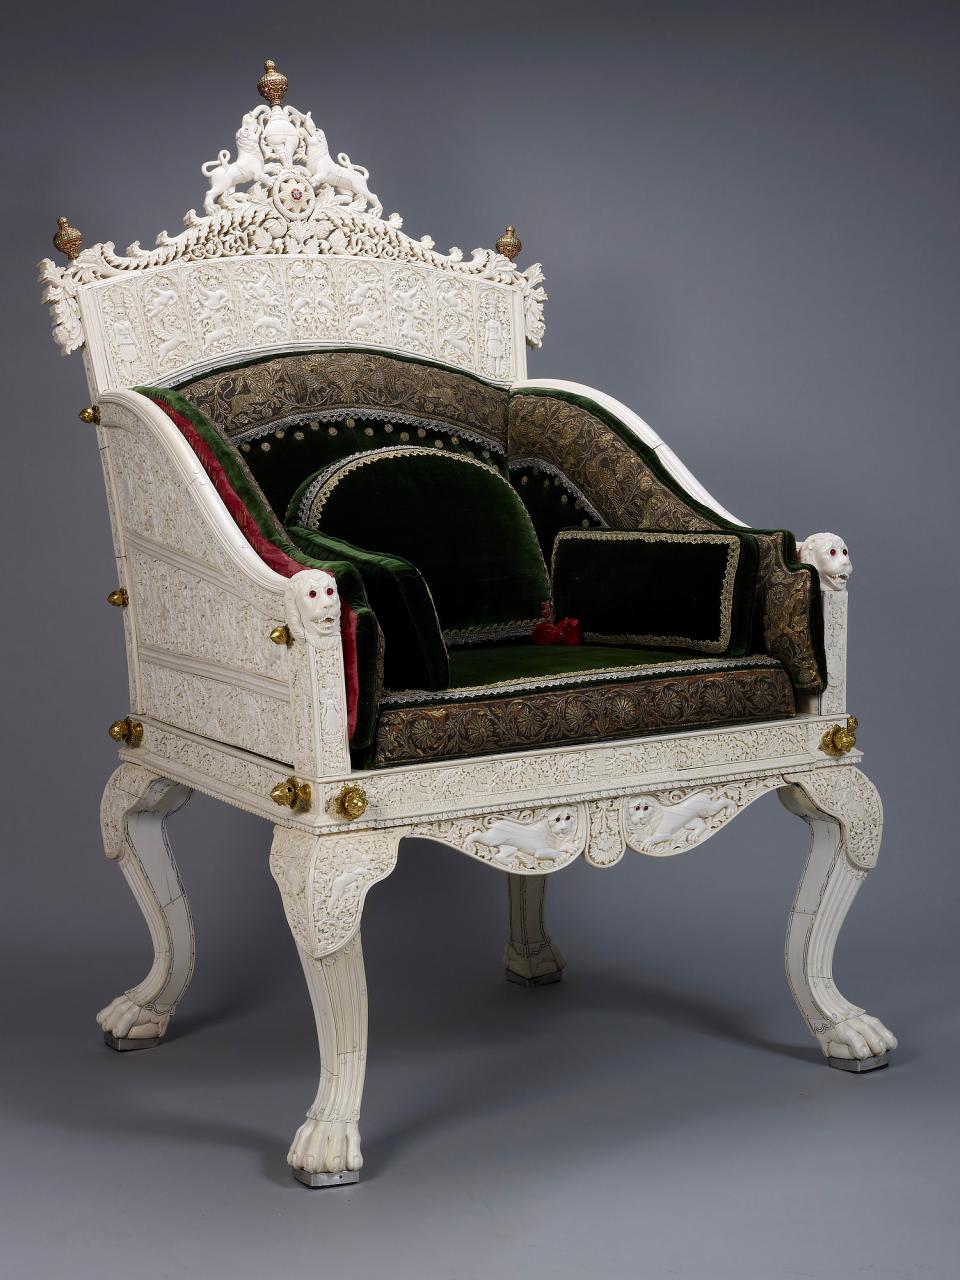 The Throne Chair - A Symbol of Status from Antiquity to the Present Day for the Robert Wilson Annual Decorate Arts Lecture 2017. Queen Victoria’s Ivory Throne, India 1840-50, The Royal Collection © Her Majesty The Queen (RCIN 1561) © Her Majesty The Queen